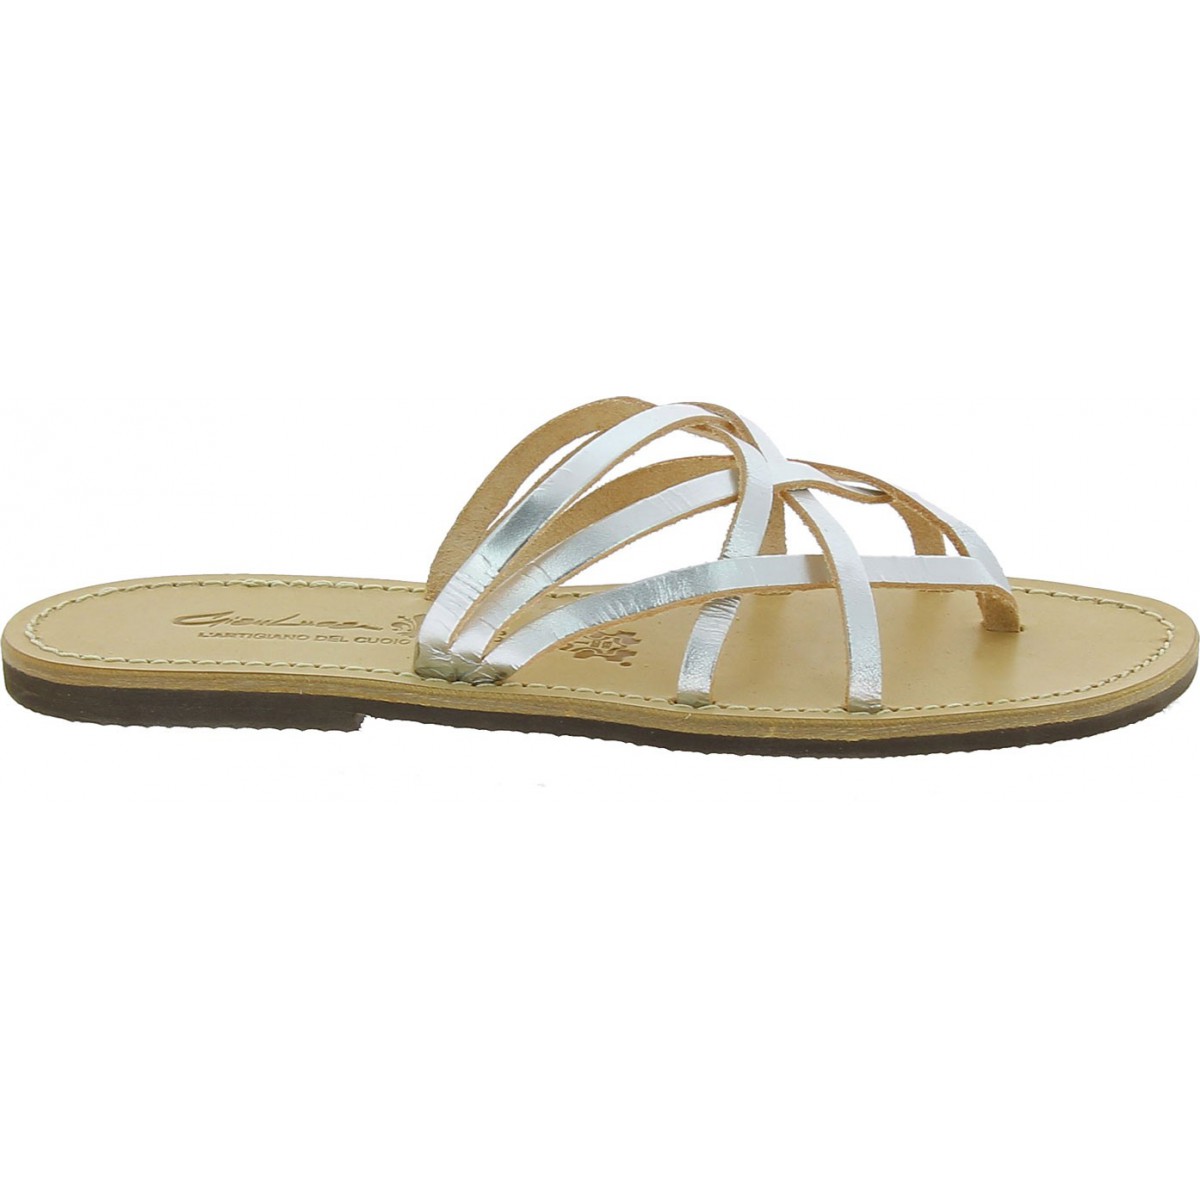 Handmade womens silver flat sandals thongs with leather sole | The ...